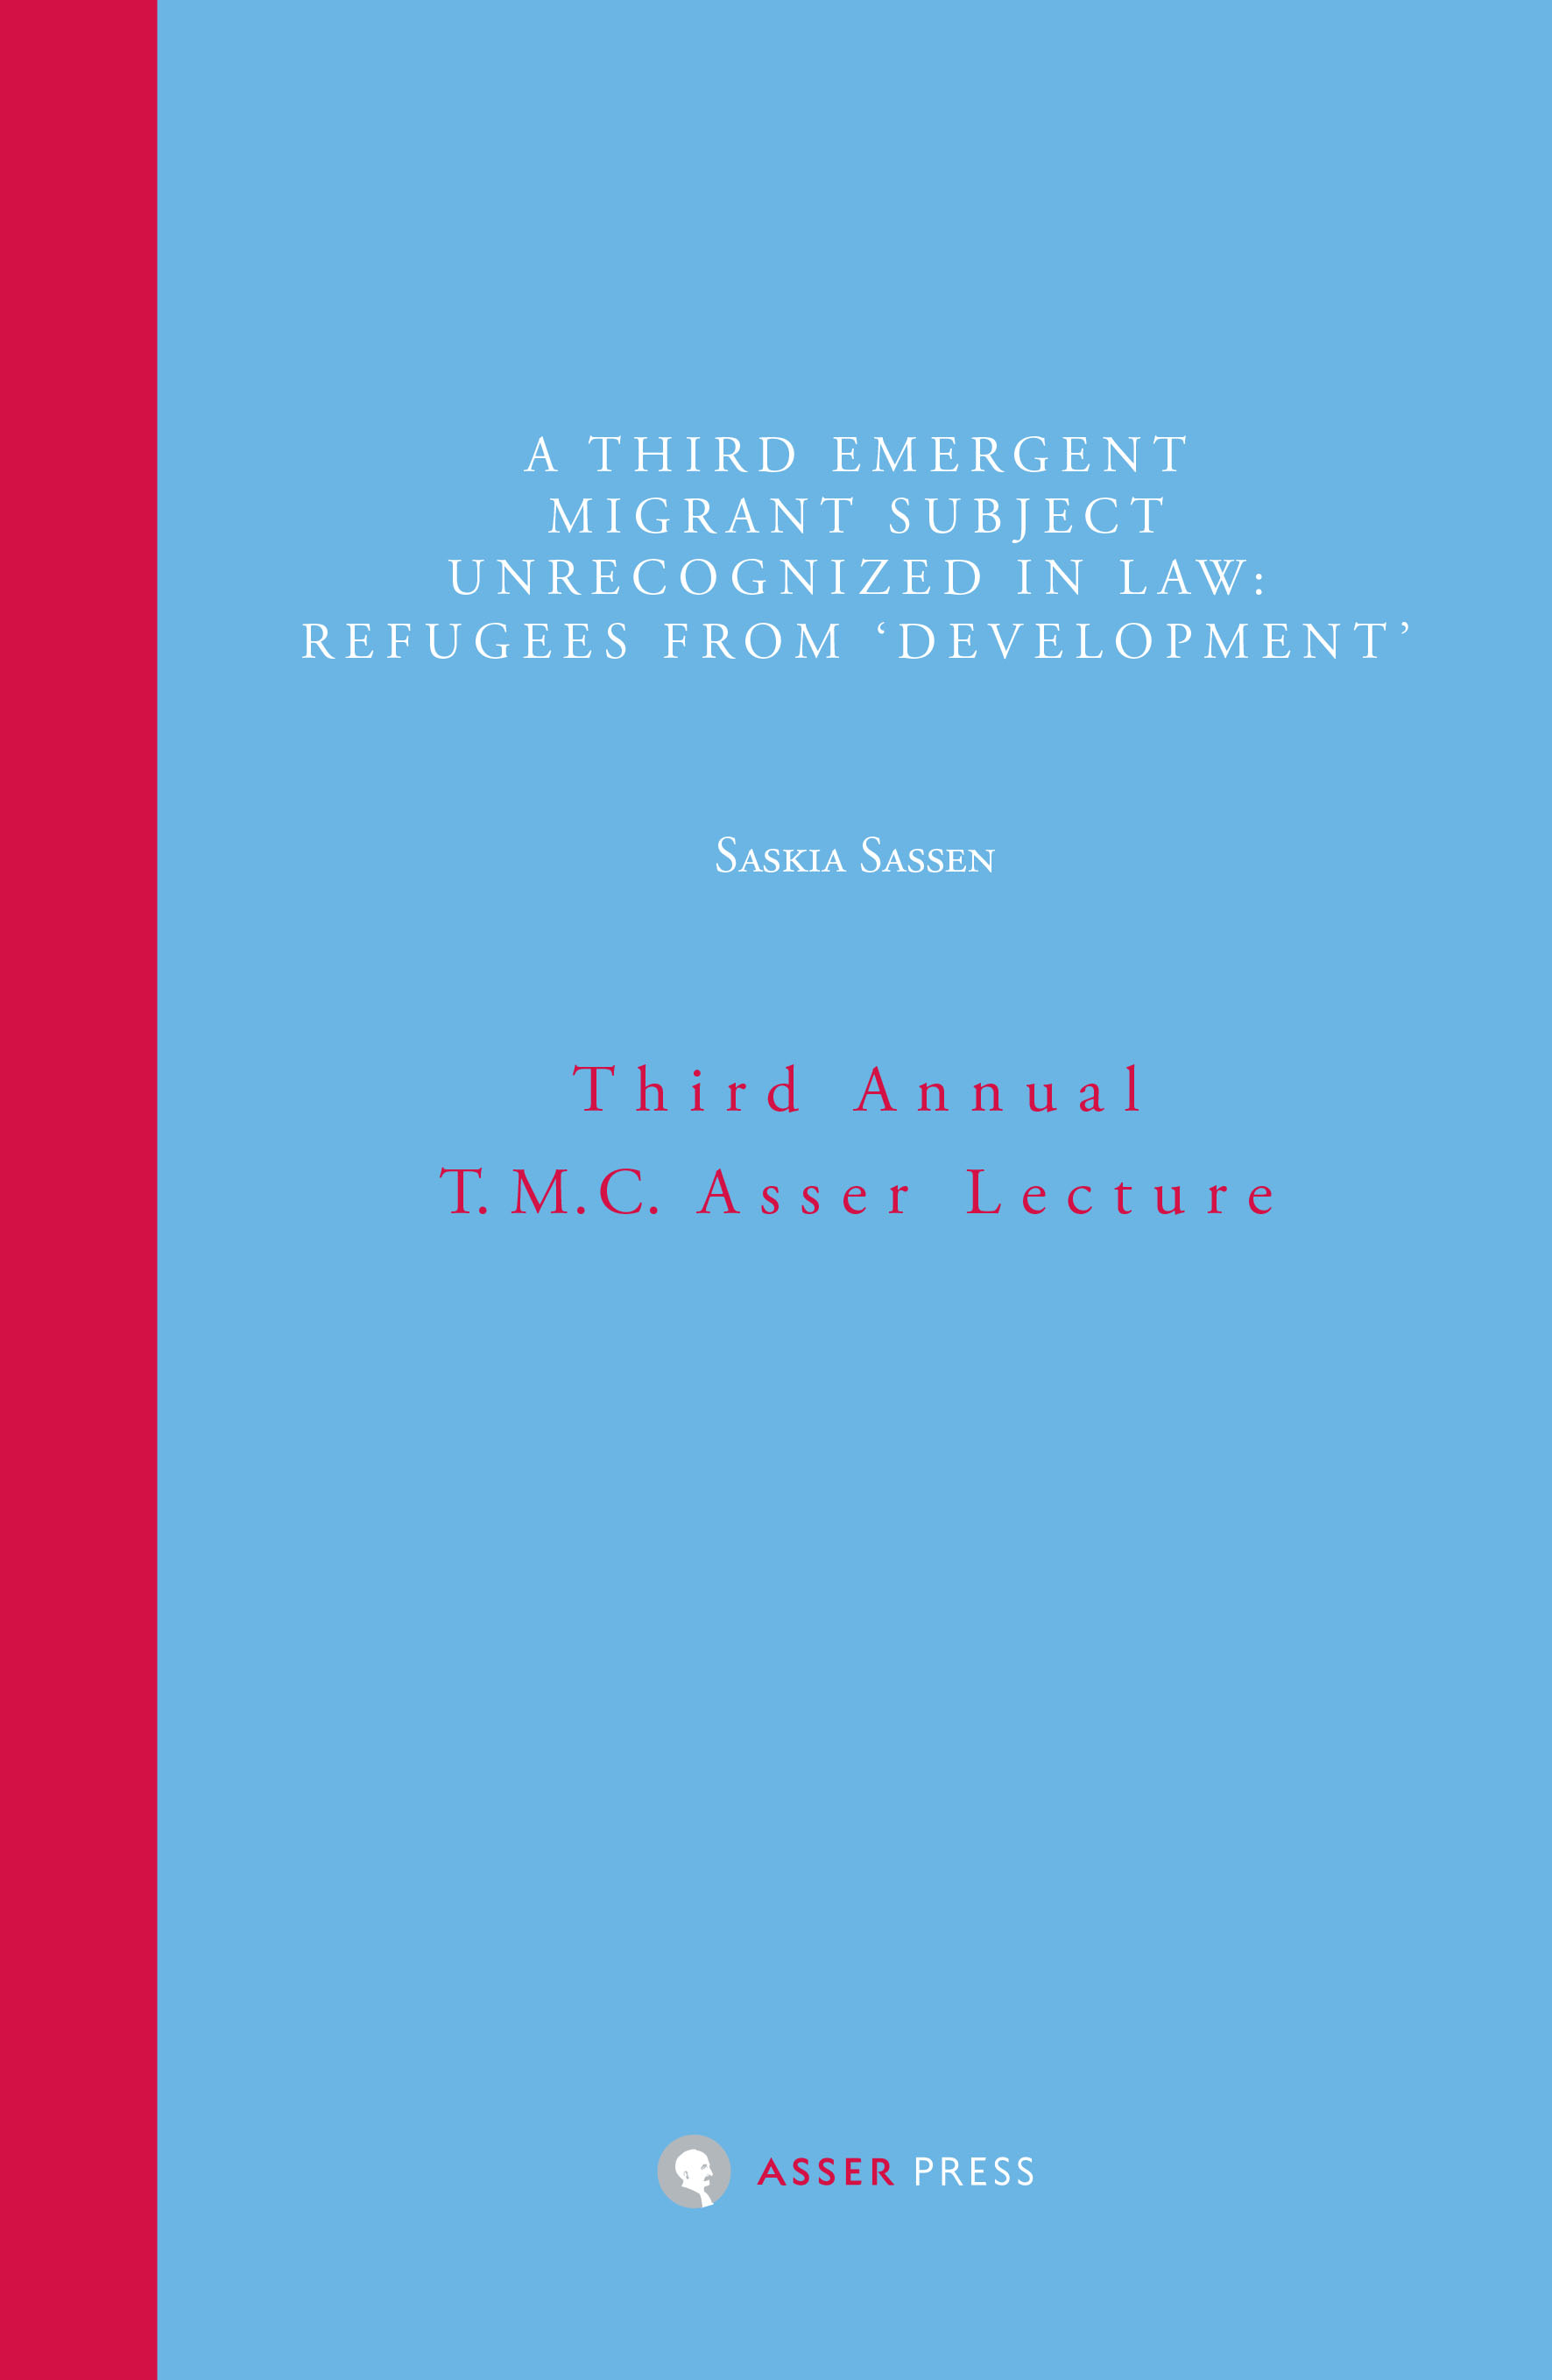 A Third Emergent Migrant Subject Unrecognized in Law: Refugees from 'Development' - Third Annual T.M.C. Asser Lecture